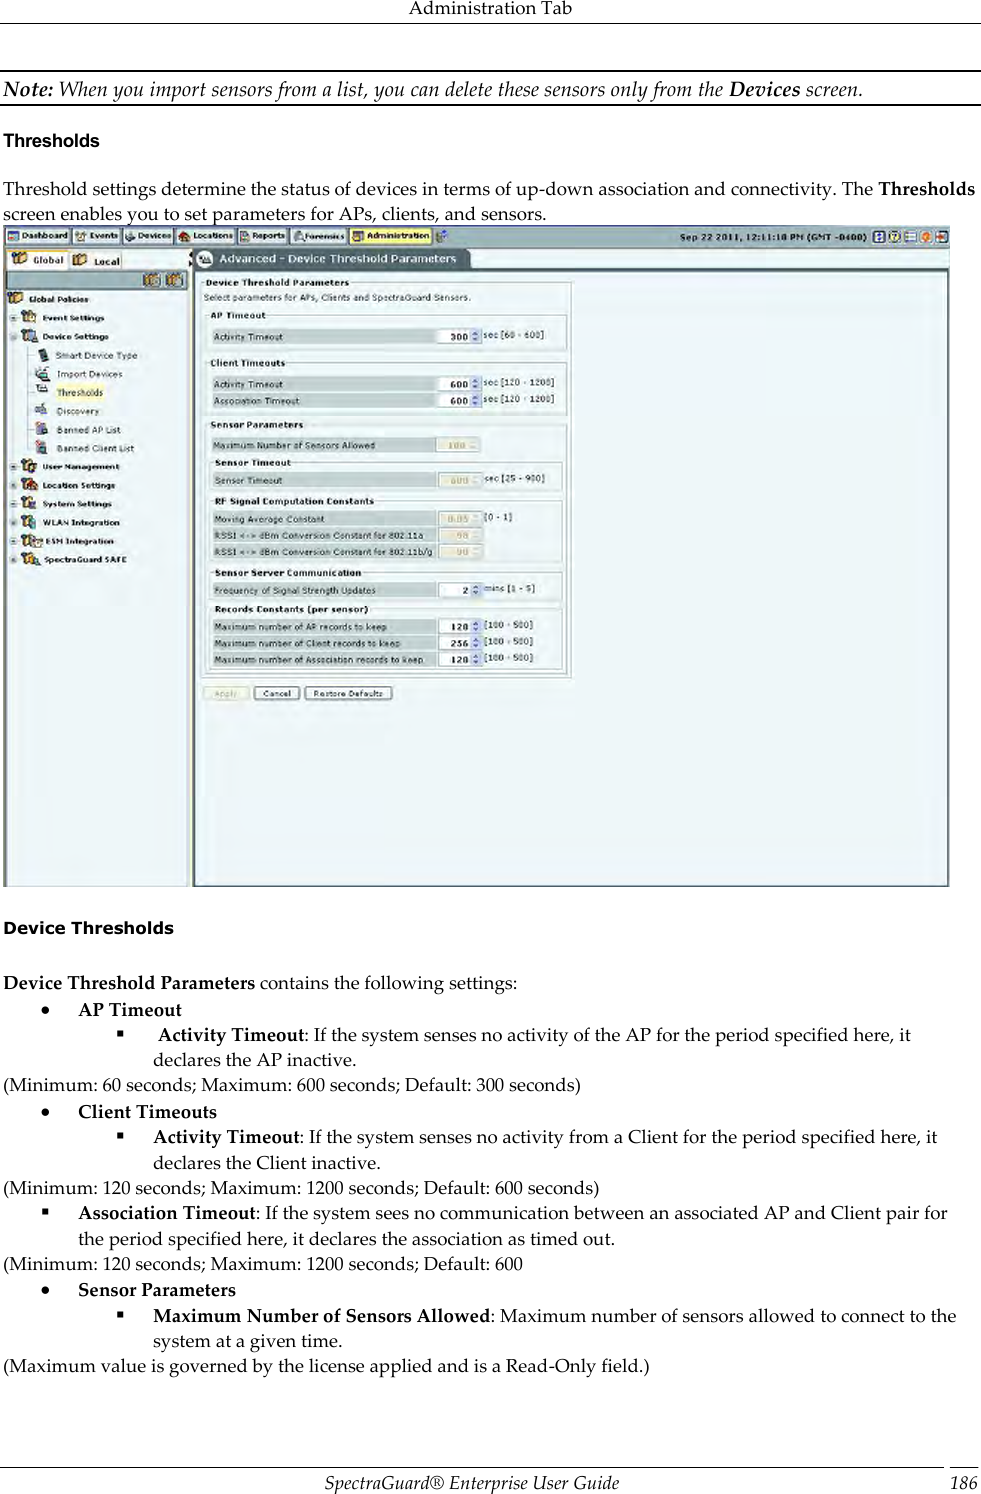 Administration Tab SpectraGuard®  Enterprise User Guide 186 Note: When you import sensors from a list, you can delete these sensors only from the Devices screen. Thresholds Threshold settings determine the status of devices in terms of up-down association and connectivity. The Thresholds screen enables you to set parameters for APs, clients, and sensors.    Device Thresholds   Device Threshold Parameters contains the following settings:  AP Timeout   Activity Timeout: If the system senses no activity of the AP for the period specified here, it declares the AP inactive. (Minimum: 60 seconds; Maximum: 600 seconds; Default: 300 seconds)  Client Timeouts  Activity Timeout: If the system senses no activity from a Client for the period specified here, it declares the Client inactive. (Minimum: 120 seconds; Maximum: 1200 seconds; Default: 600 seconds)  Association Timeout: If the system sees no communication between an associated AP and Client pair for the period specified here, it declares the association as timed out. (Minimum: 120 seconds; Maximum: 1200 seconds; Default: 600  Sensor Parameters  Maximum Number of Sensors Allowed: Maximum number of sensors allowed to connect to the system at a given time. (Maximum value is governed by the license applied and is a Read-Only field.) 